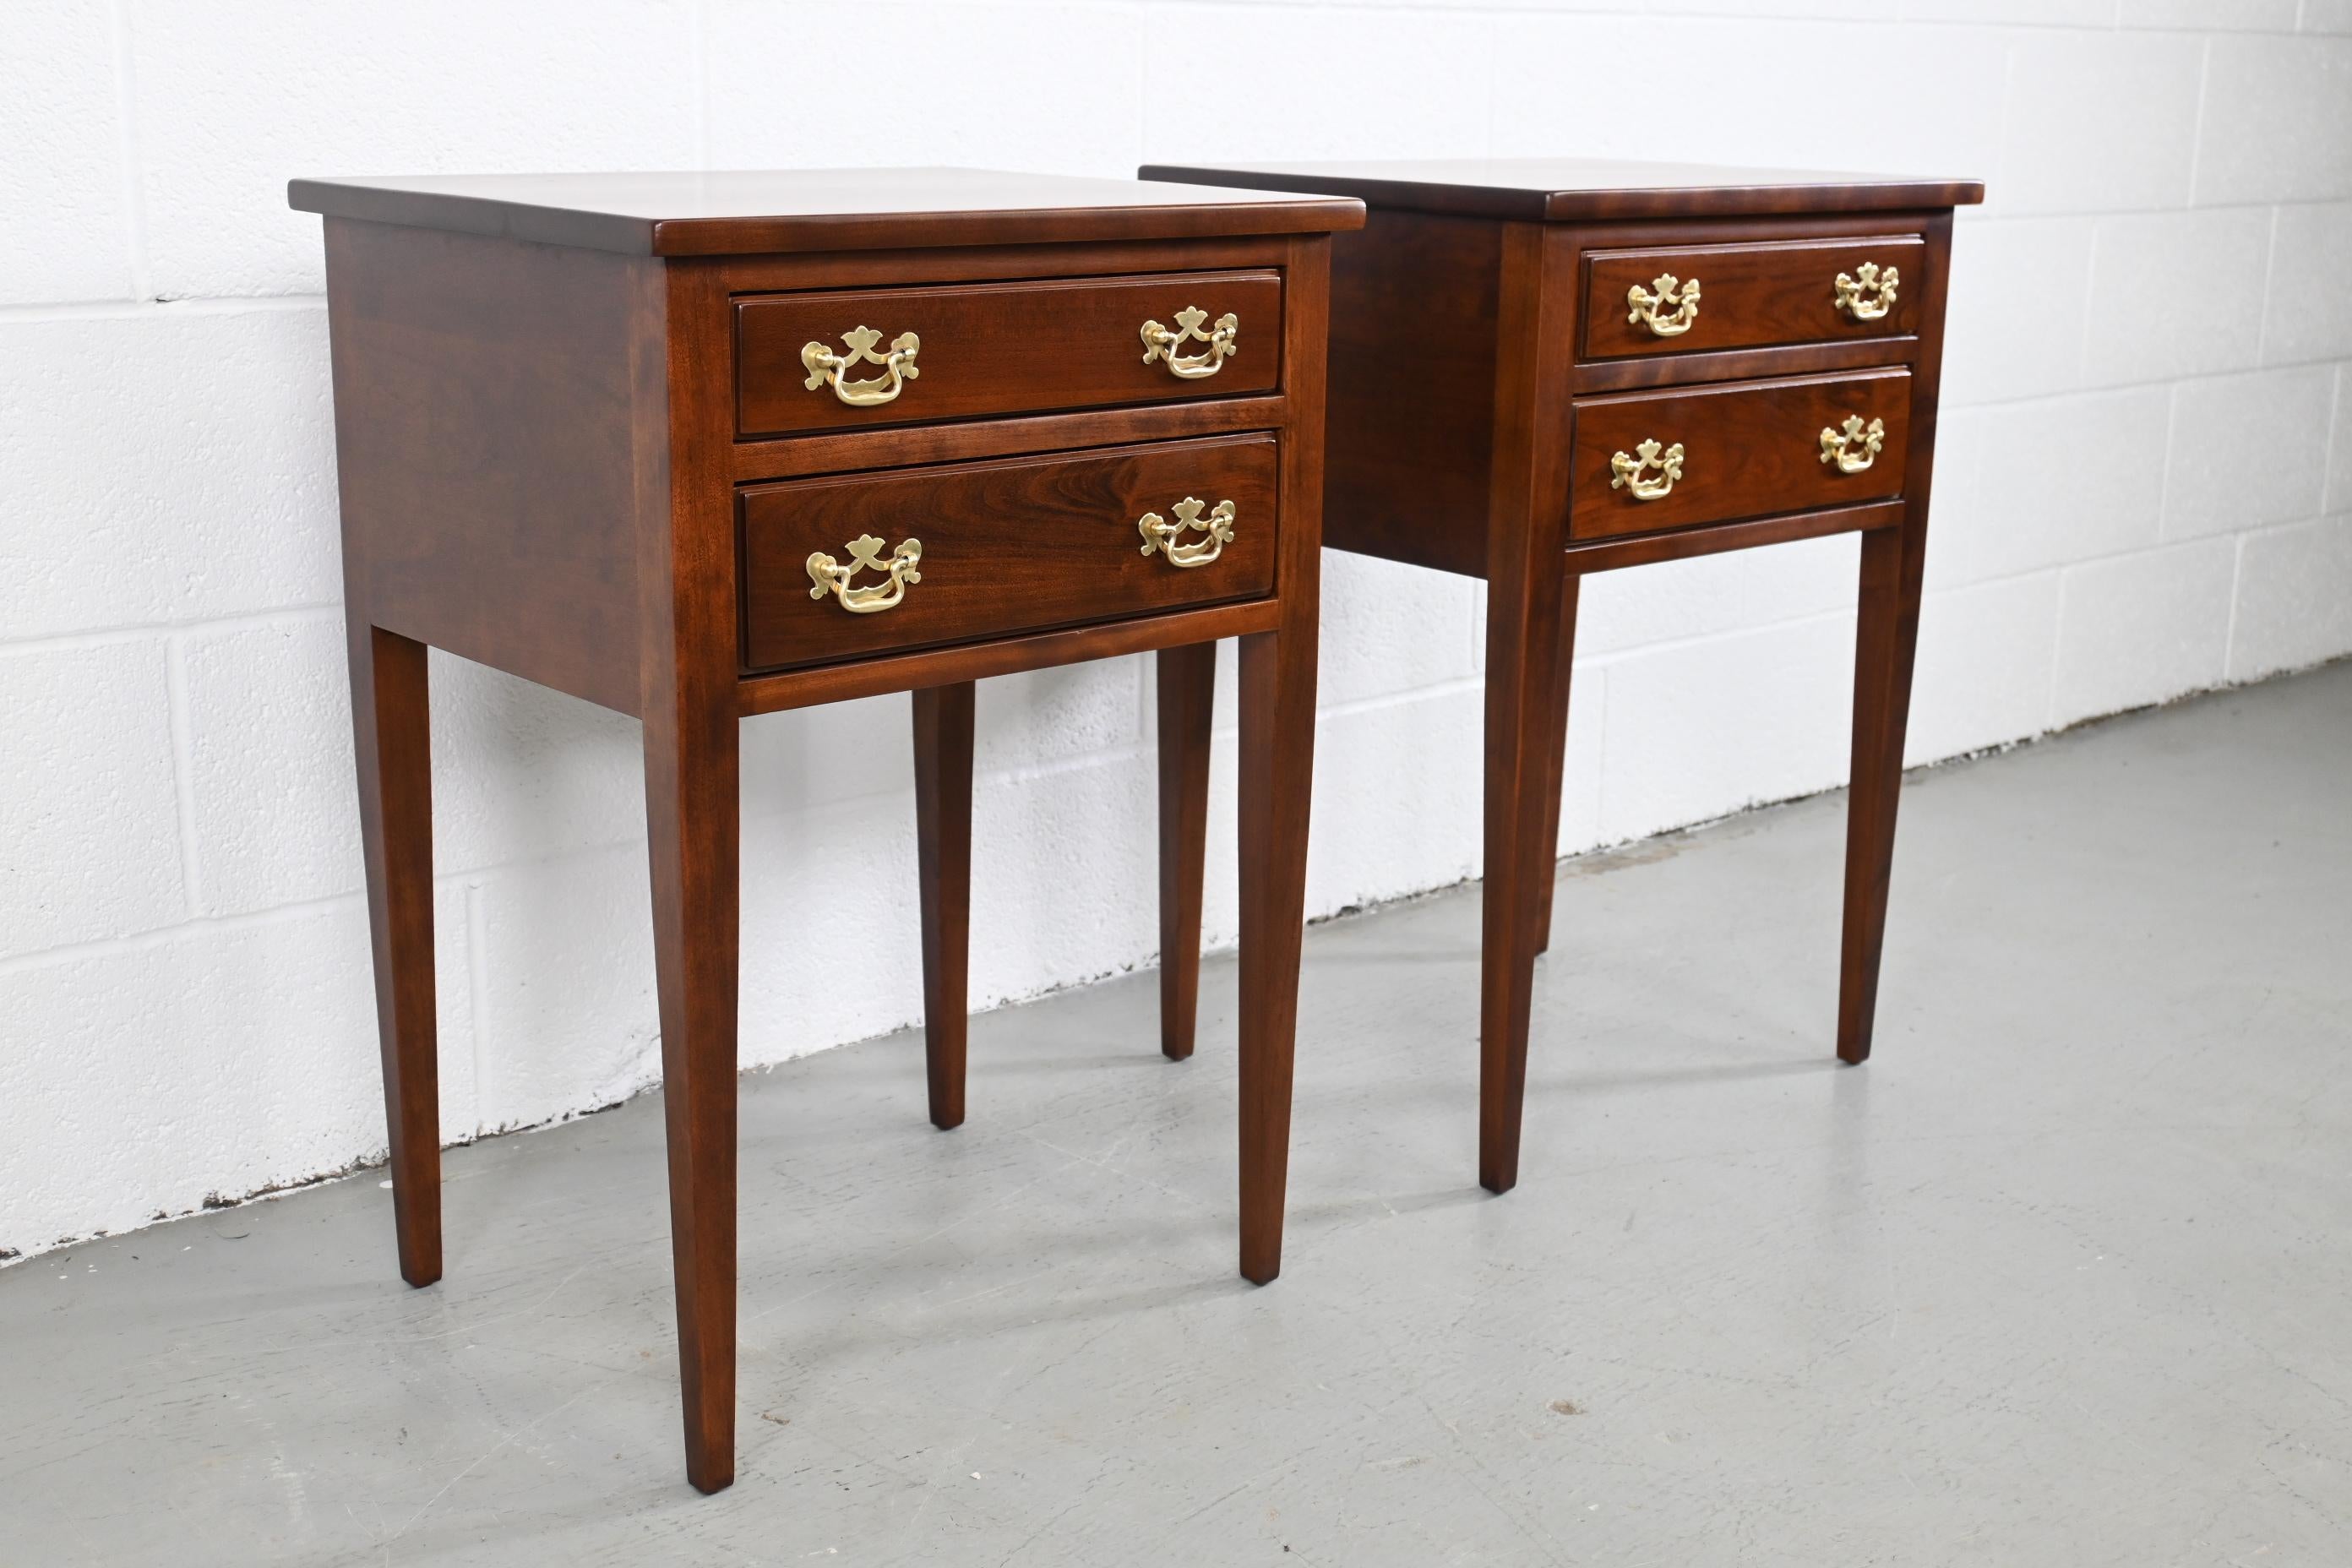 Leopold Stickley Federal cherry end tables or nightstands

Stickley Furniture, USA, 1950s

Measures: 19 Wide x 16 Deep x 27.25 High.

Solid cherry Federal style two drawer end tables with tapered legs and brass pulls.

Professionally